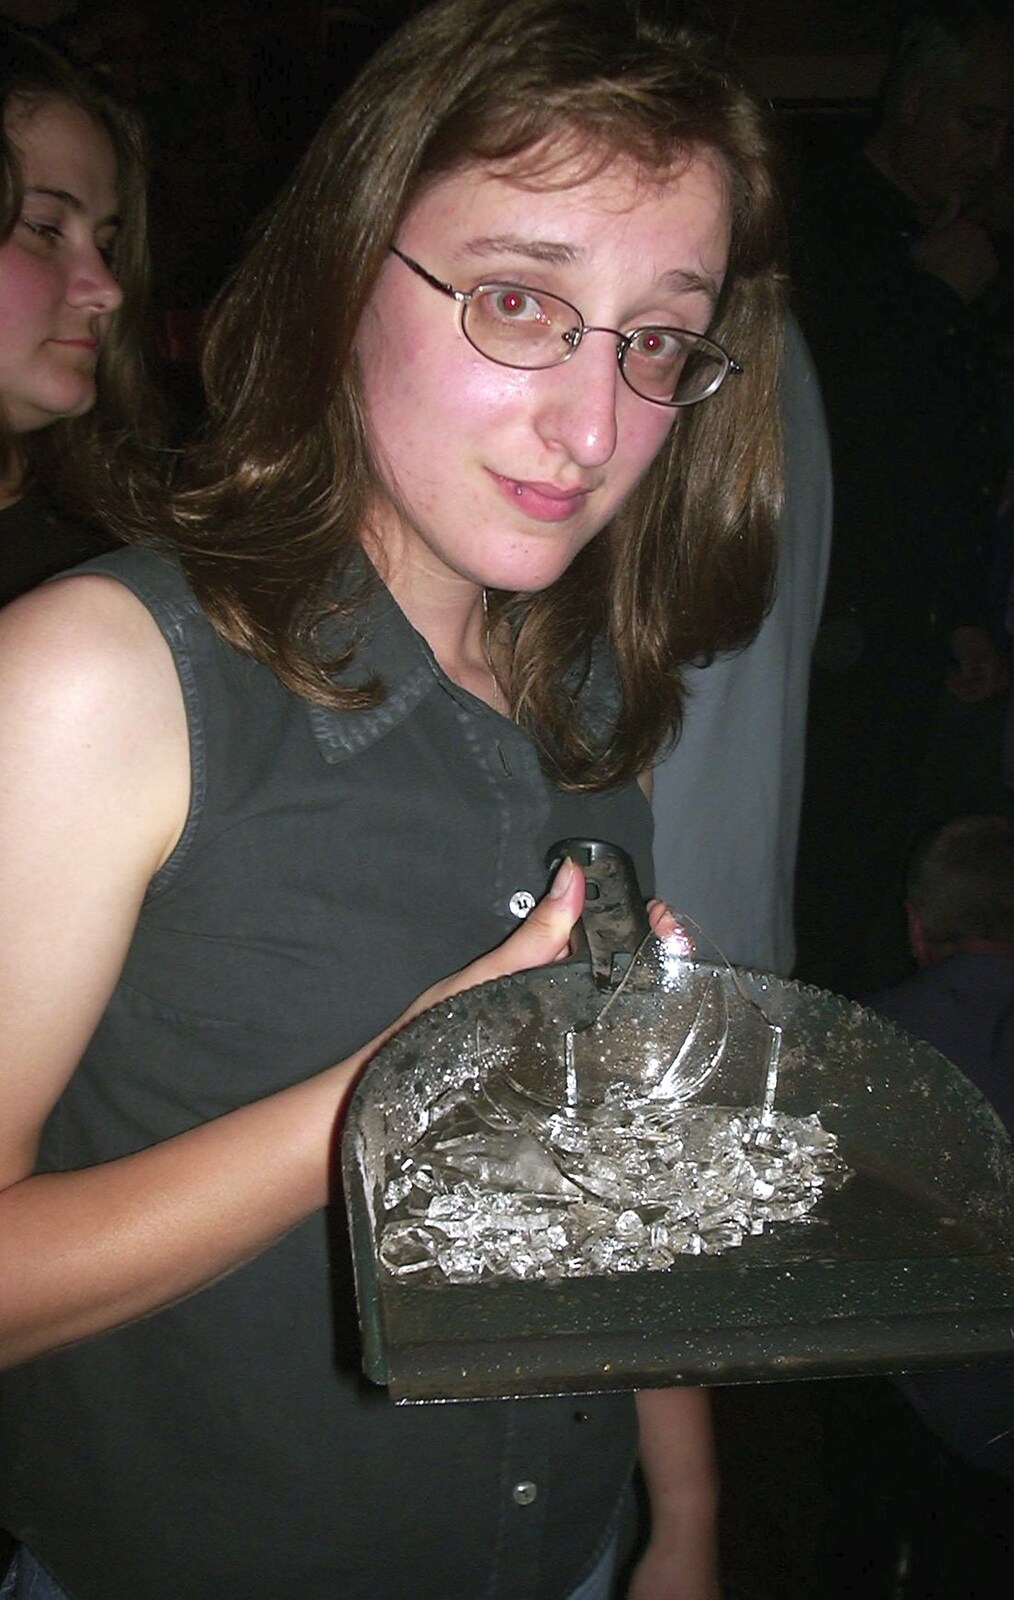 Longview and The BBs, Norwich and Banham, Norfolk - 4th July 2003: Suey scoops up a broken glass